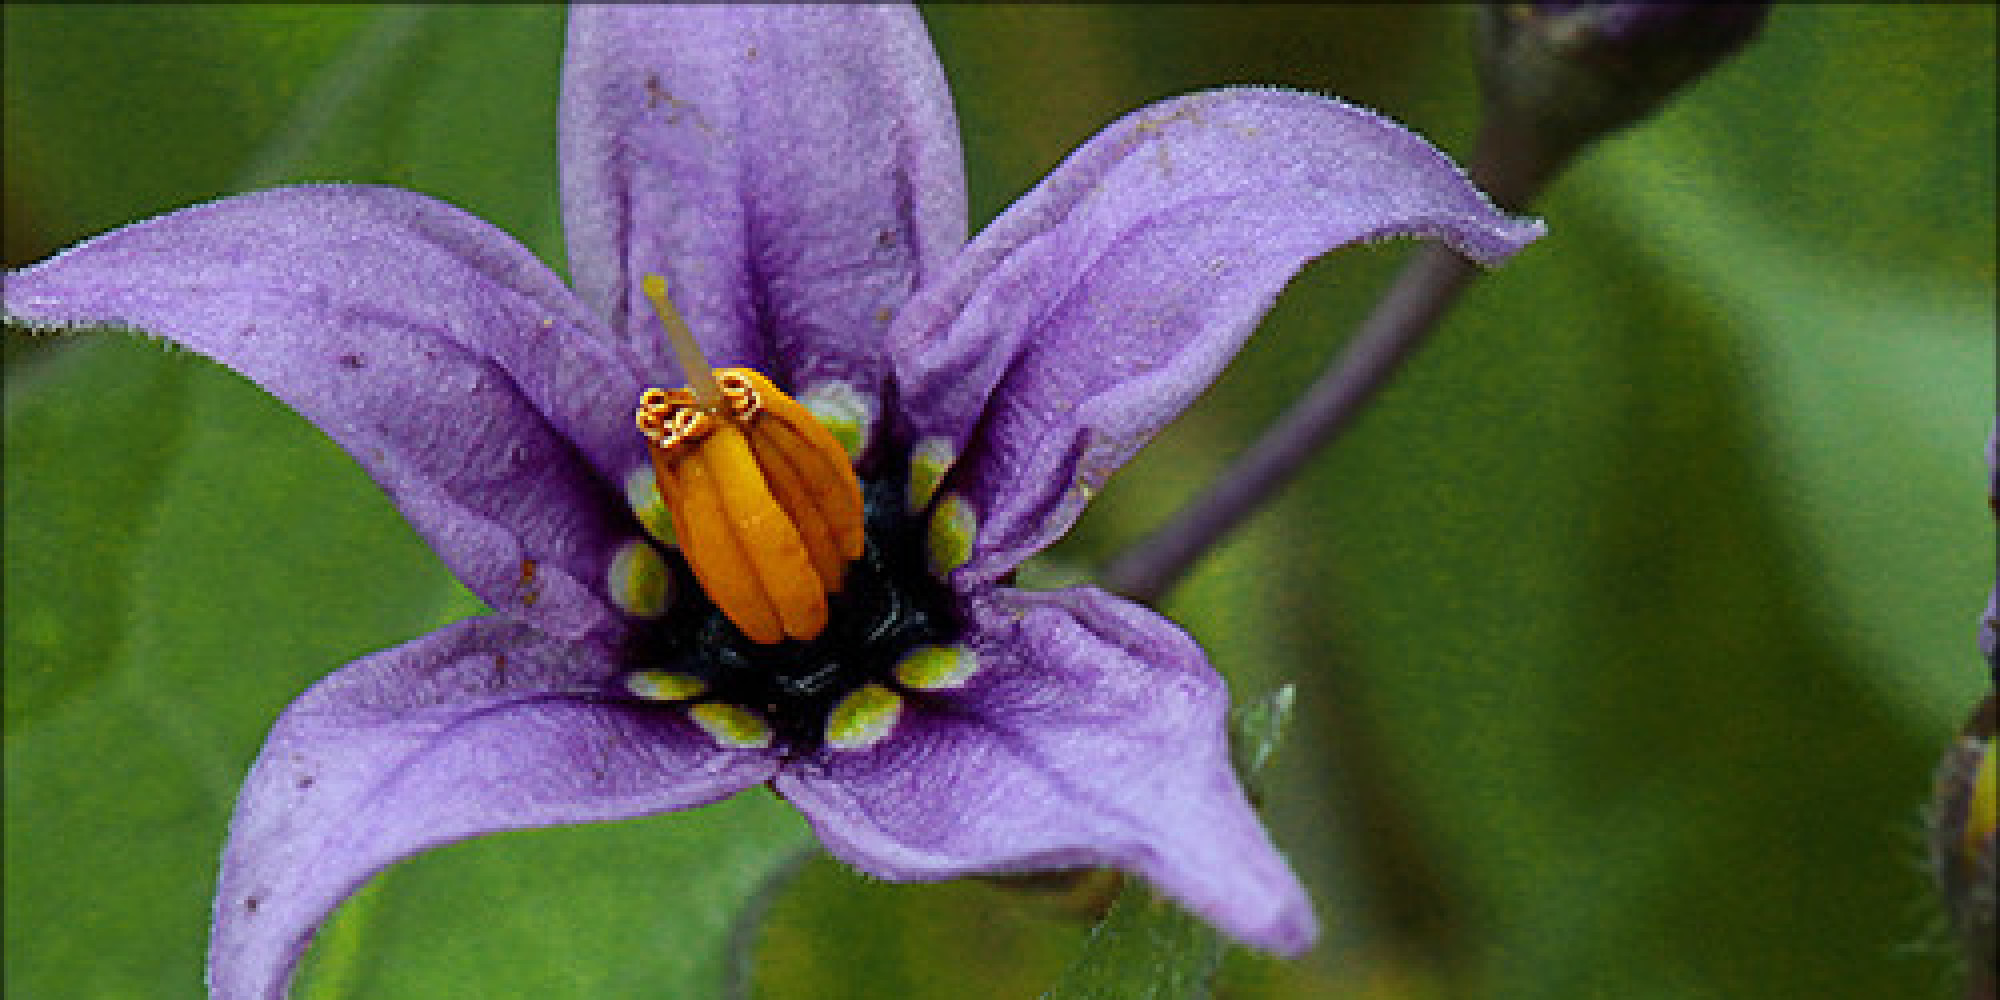 The History of the Deadly Nightshade Plant